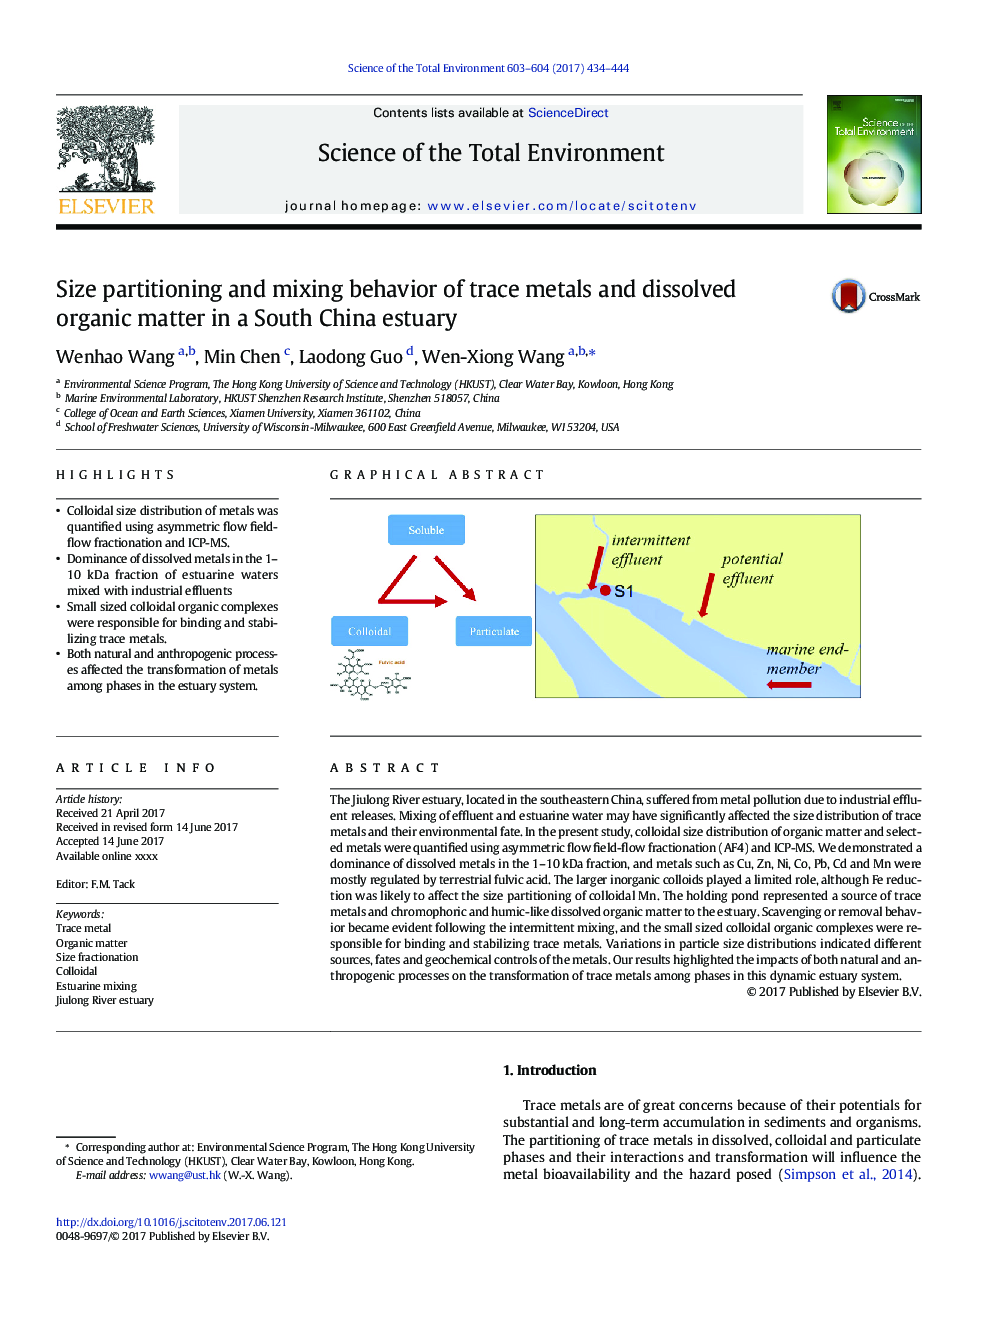 Size partitioning and mixing behavior of trace metals and dissolved organic matter in a South China estuary